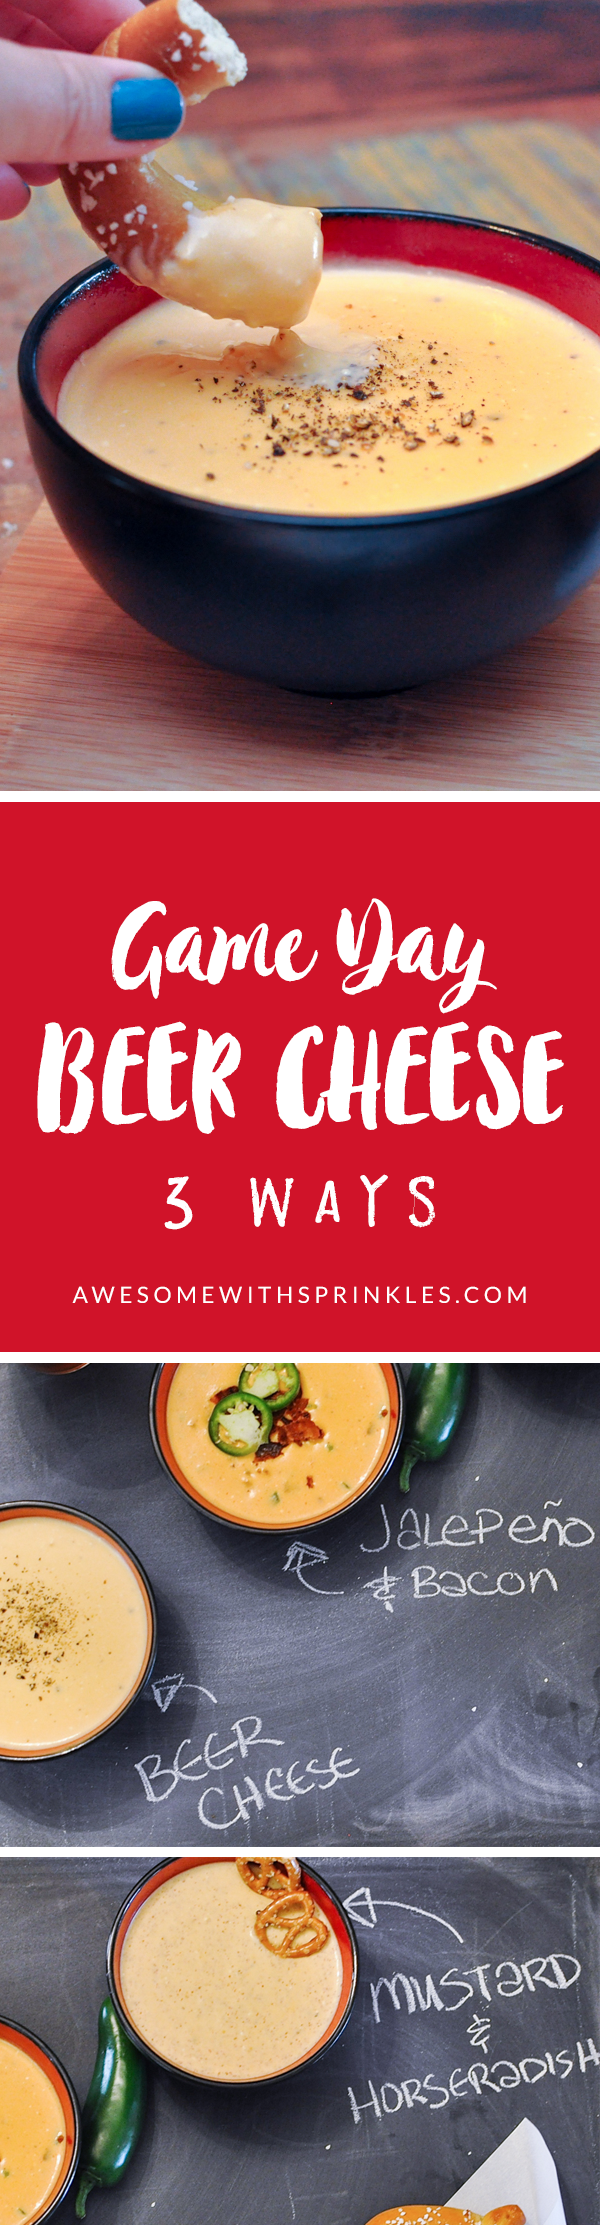 Homemade Beer Cheese - 3 Ways | These three gooey beer cheese dips really bring their A-game to your Game Day table! Served with a warm pretzel it's a touchdown in your tummy! | Awesome with Sprinkles